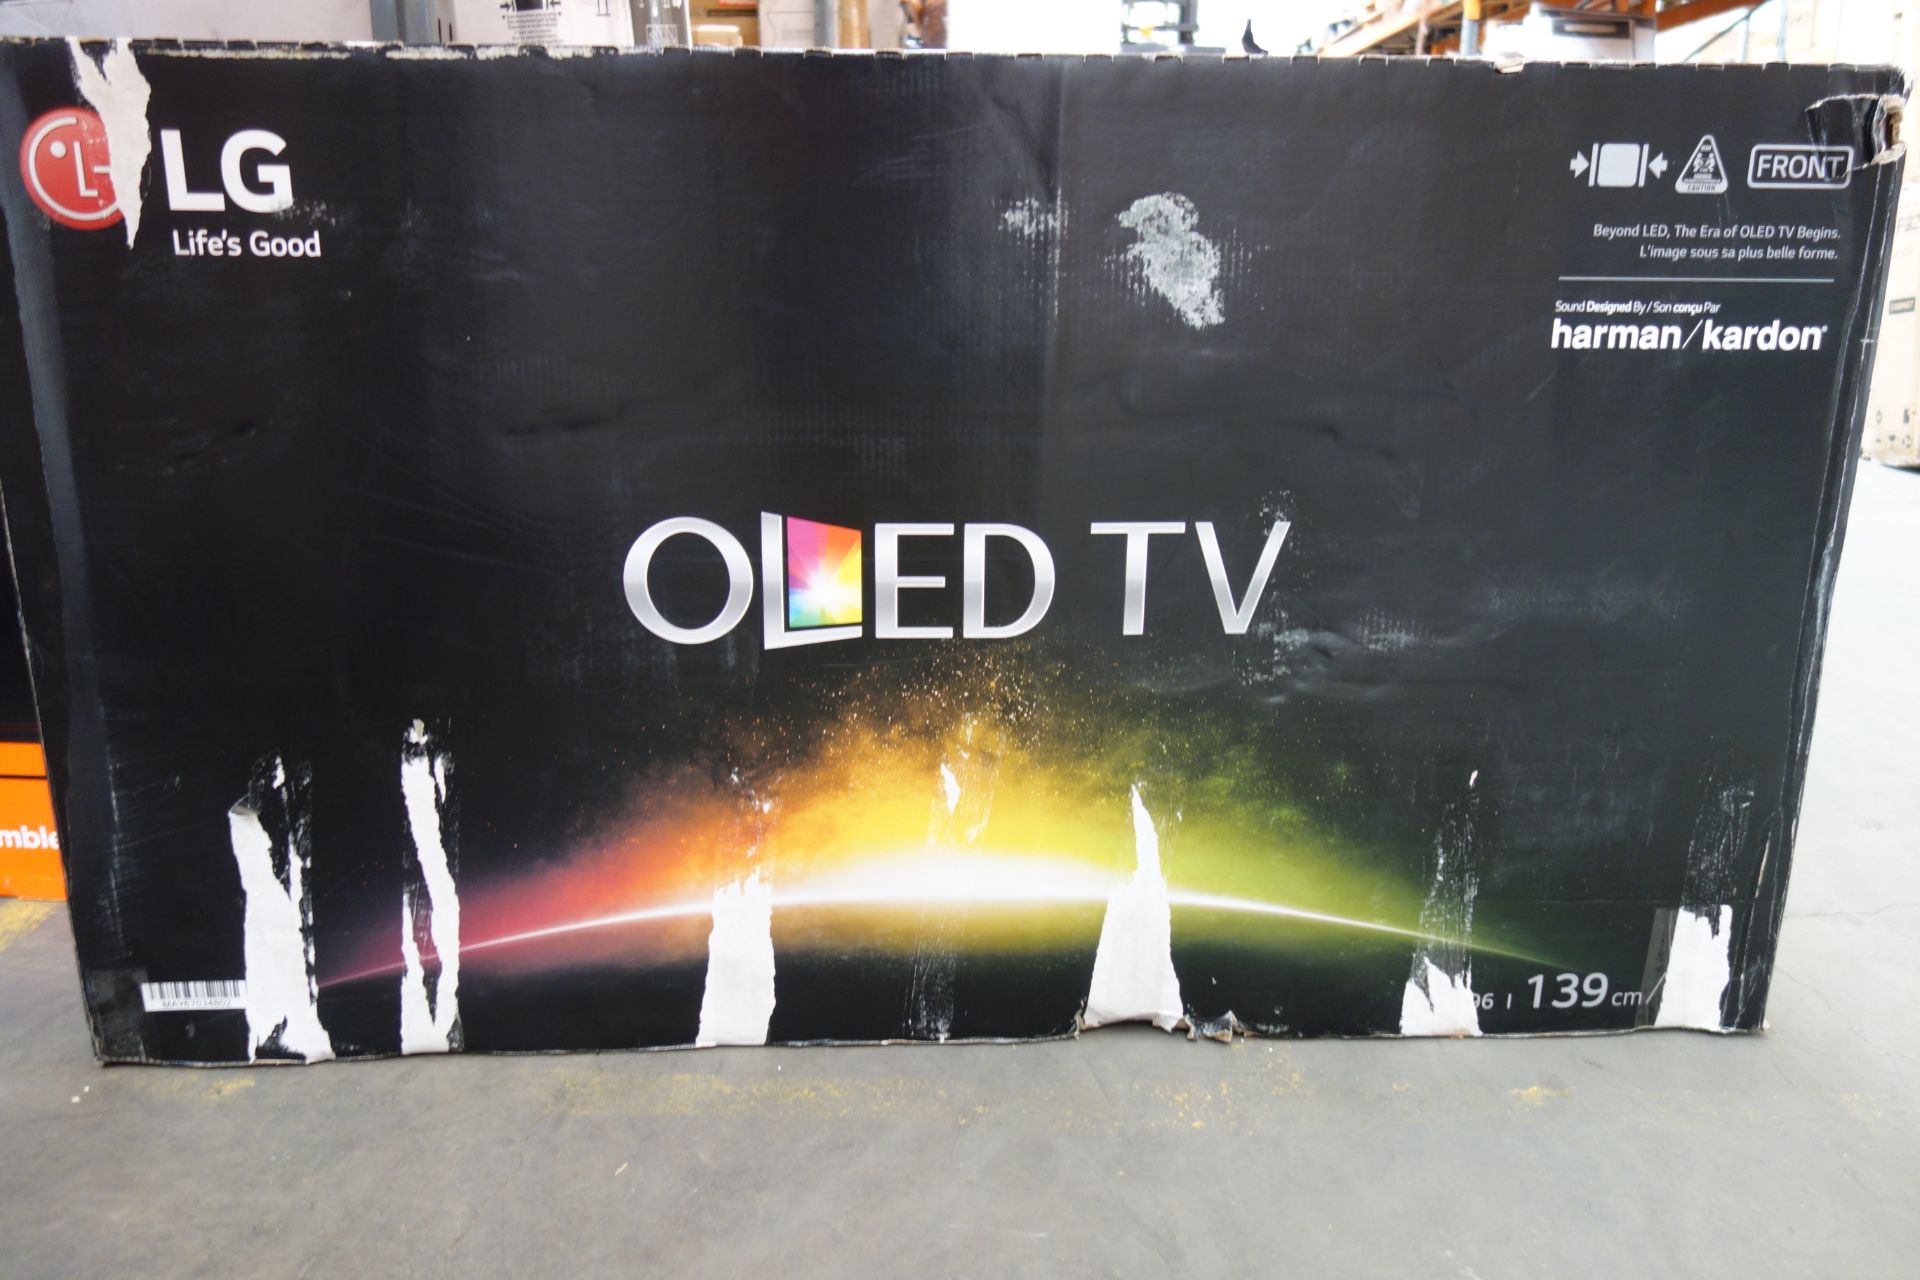 LG 55EG960V Smart 3D 4k Ultra HD 55" Curved OLED TV. RRP £2,499. 4k Ultra HD picture is up to 4